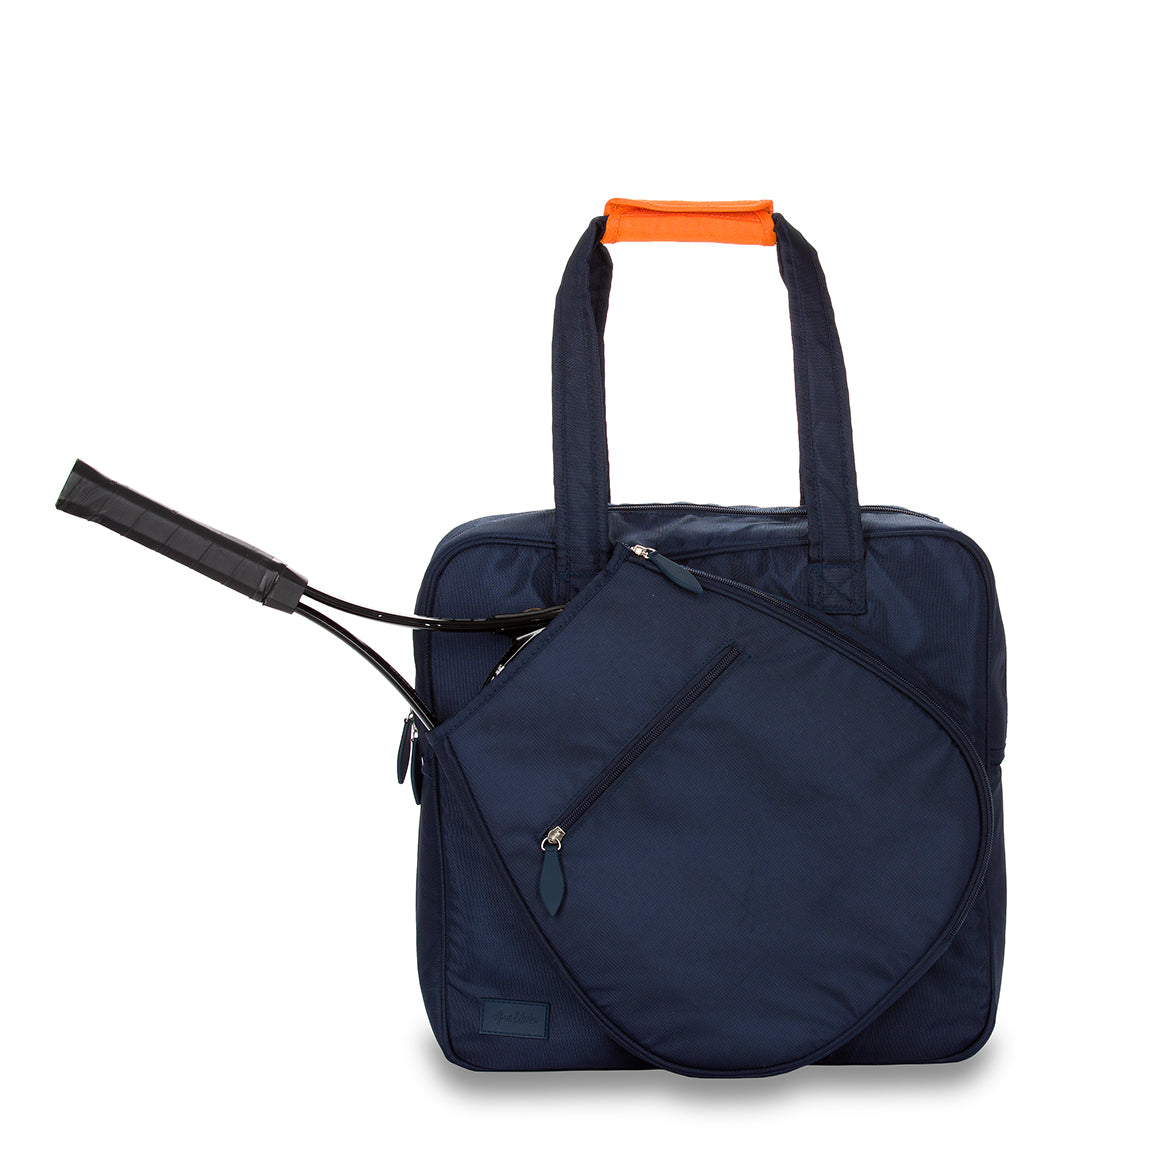 Front view of navy tennis tote with tennis racquet in the front pocket. Tote has orange handle cap.